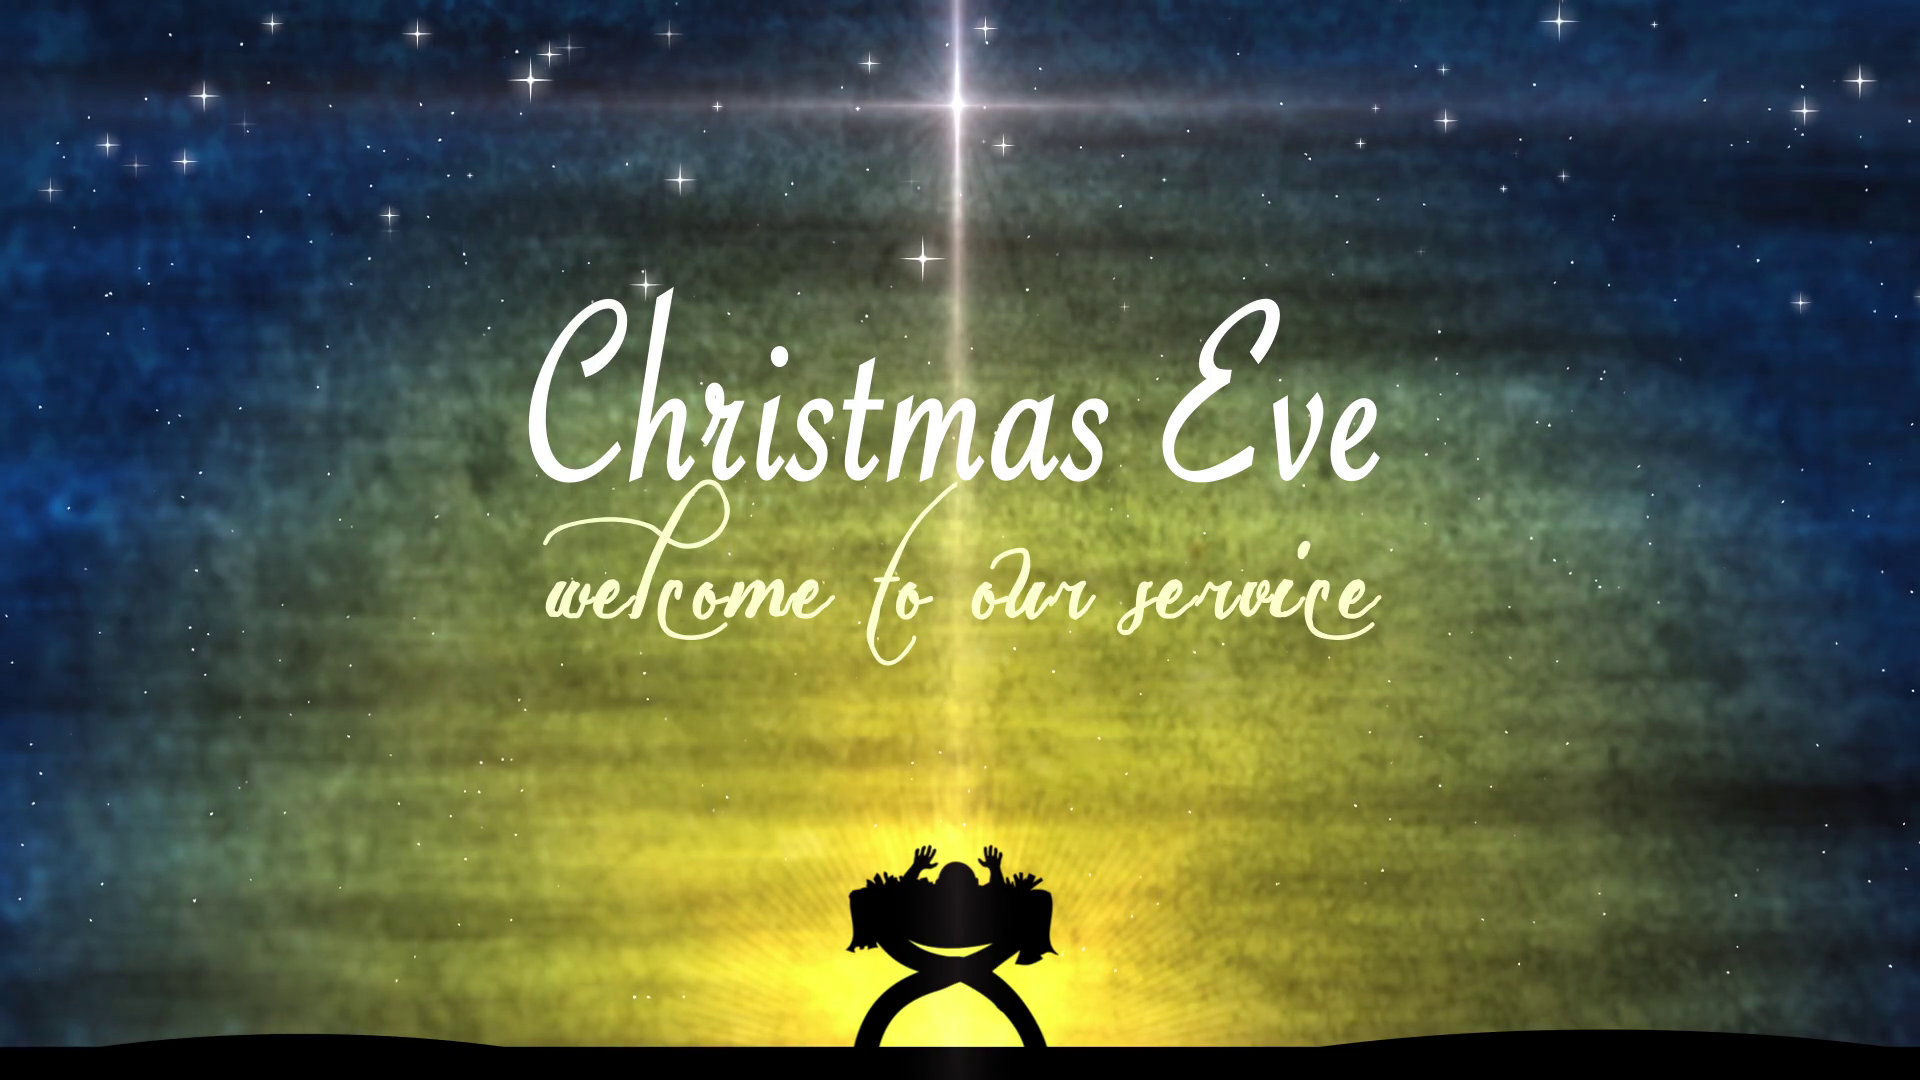 Jesus Christ Christmas Eve Photo Download JPG, PNG, GIF, RAW, TIFF, PSD, PDF and Watch Online